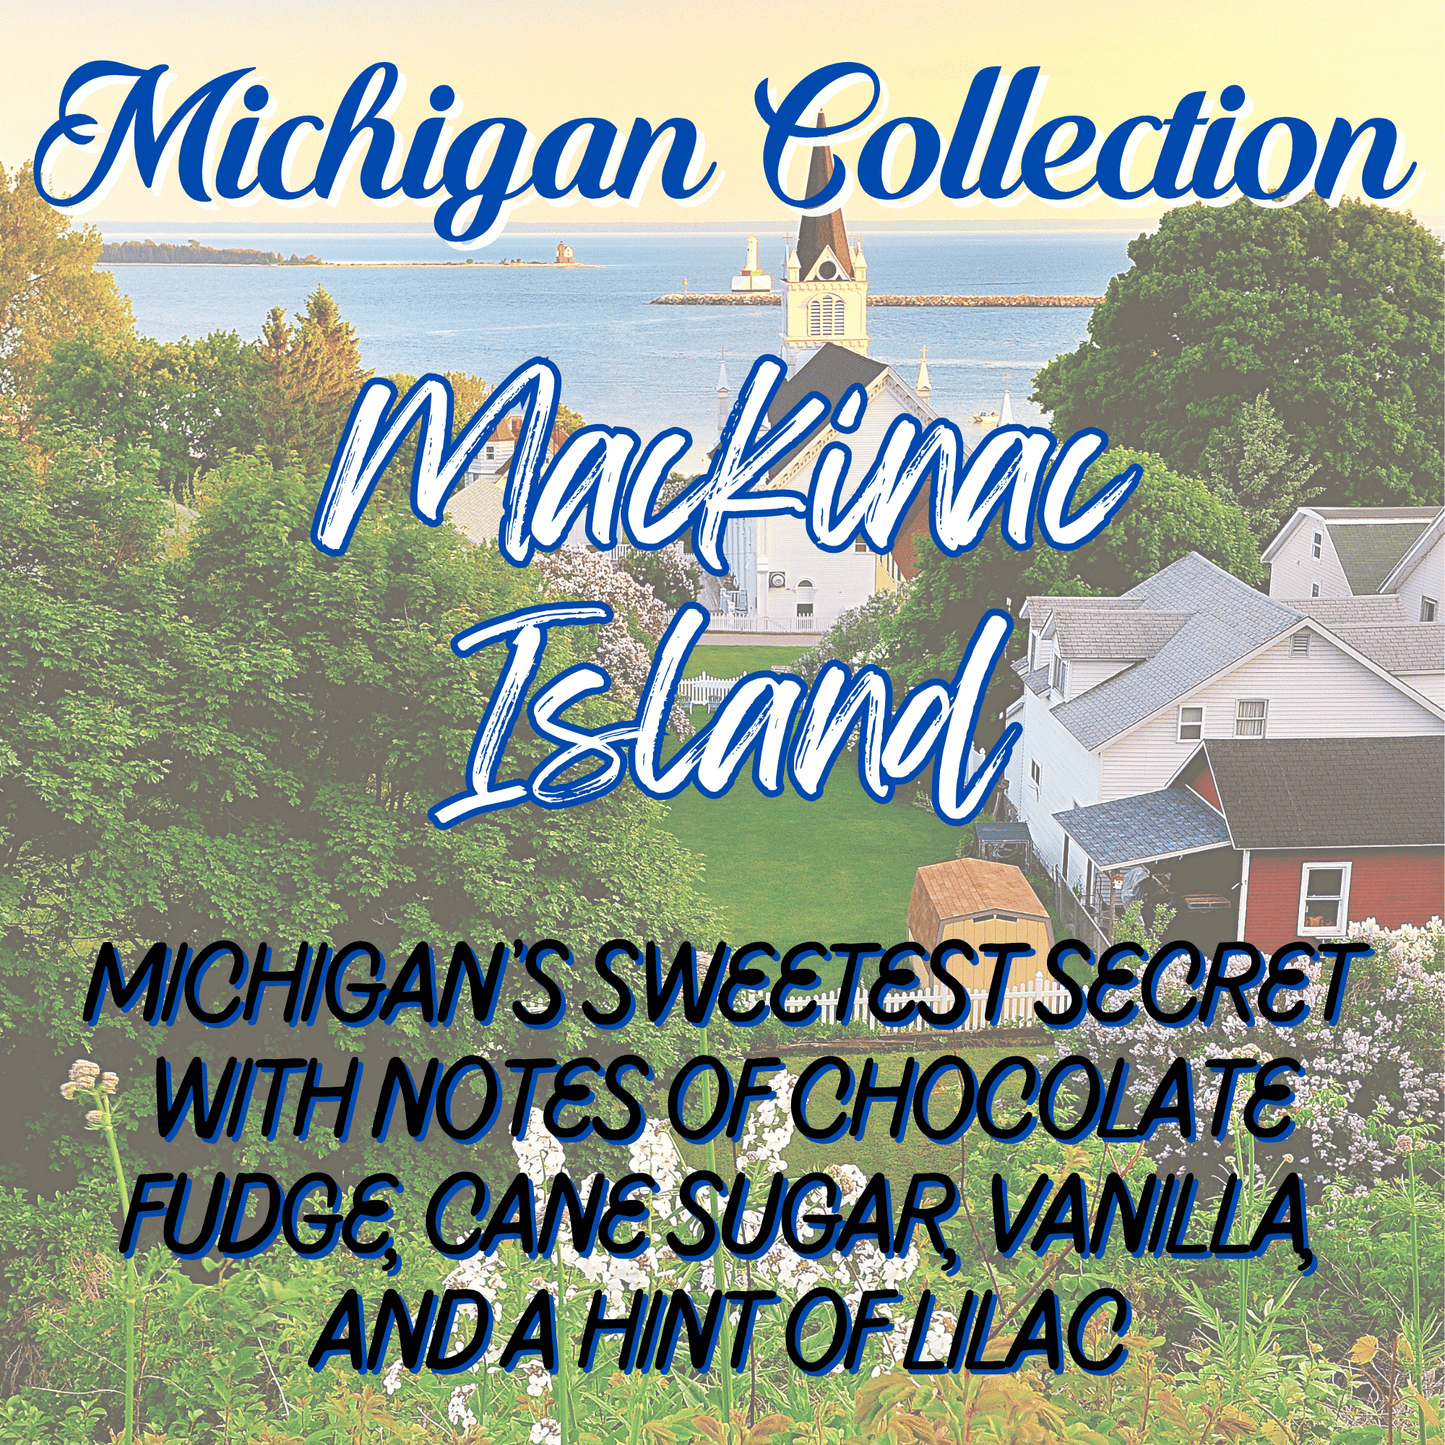 Michigan Hand + Body Lotion | Mackinac Island Inspired Scent | Choice of Size